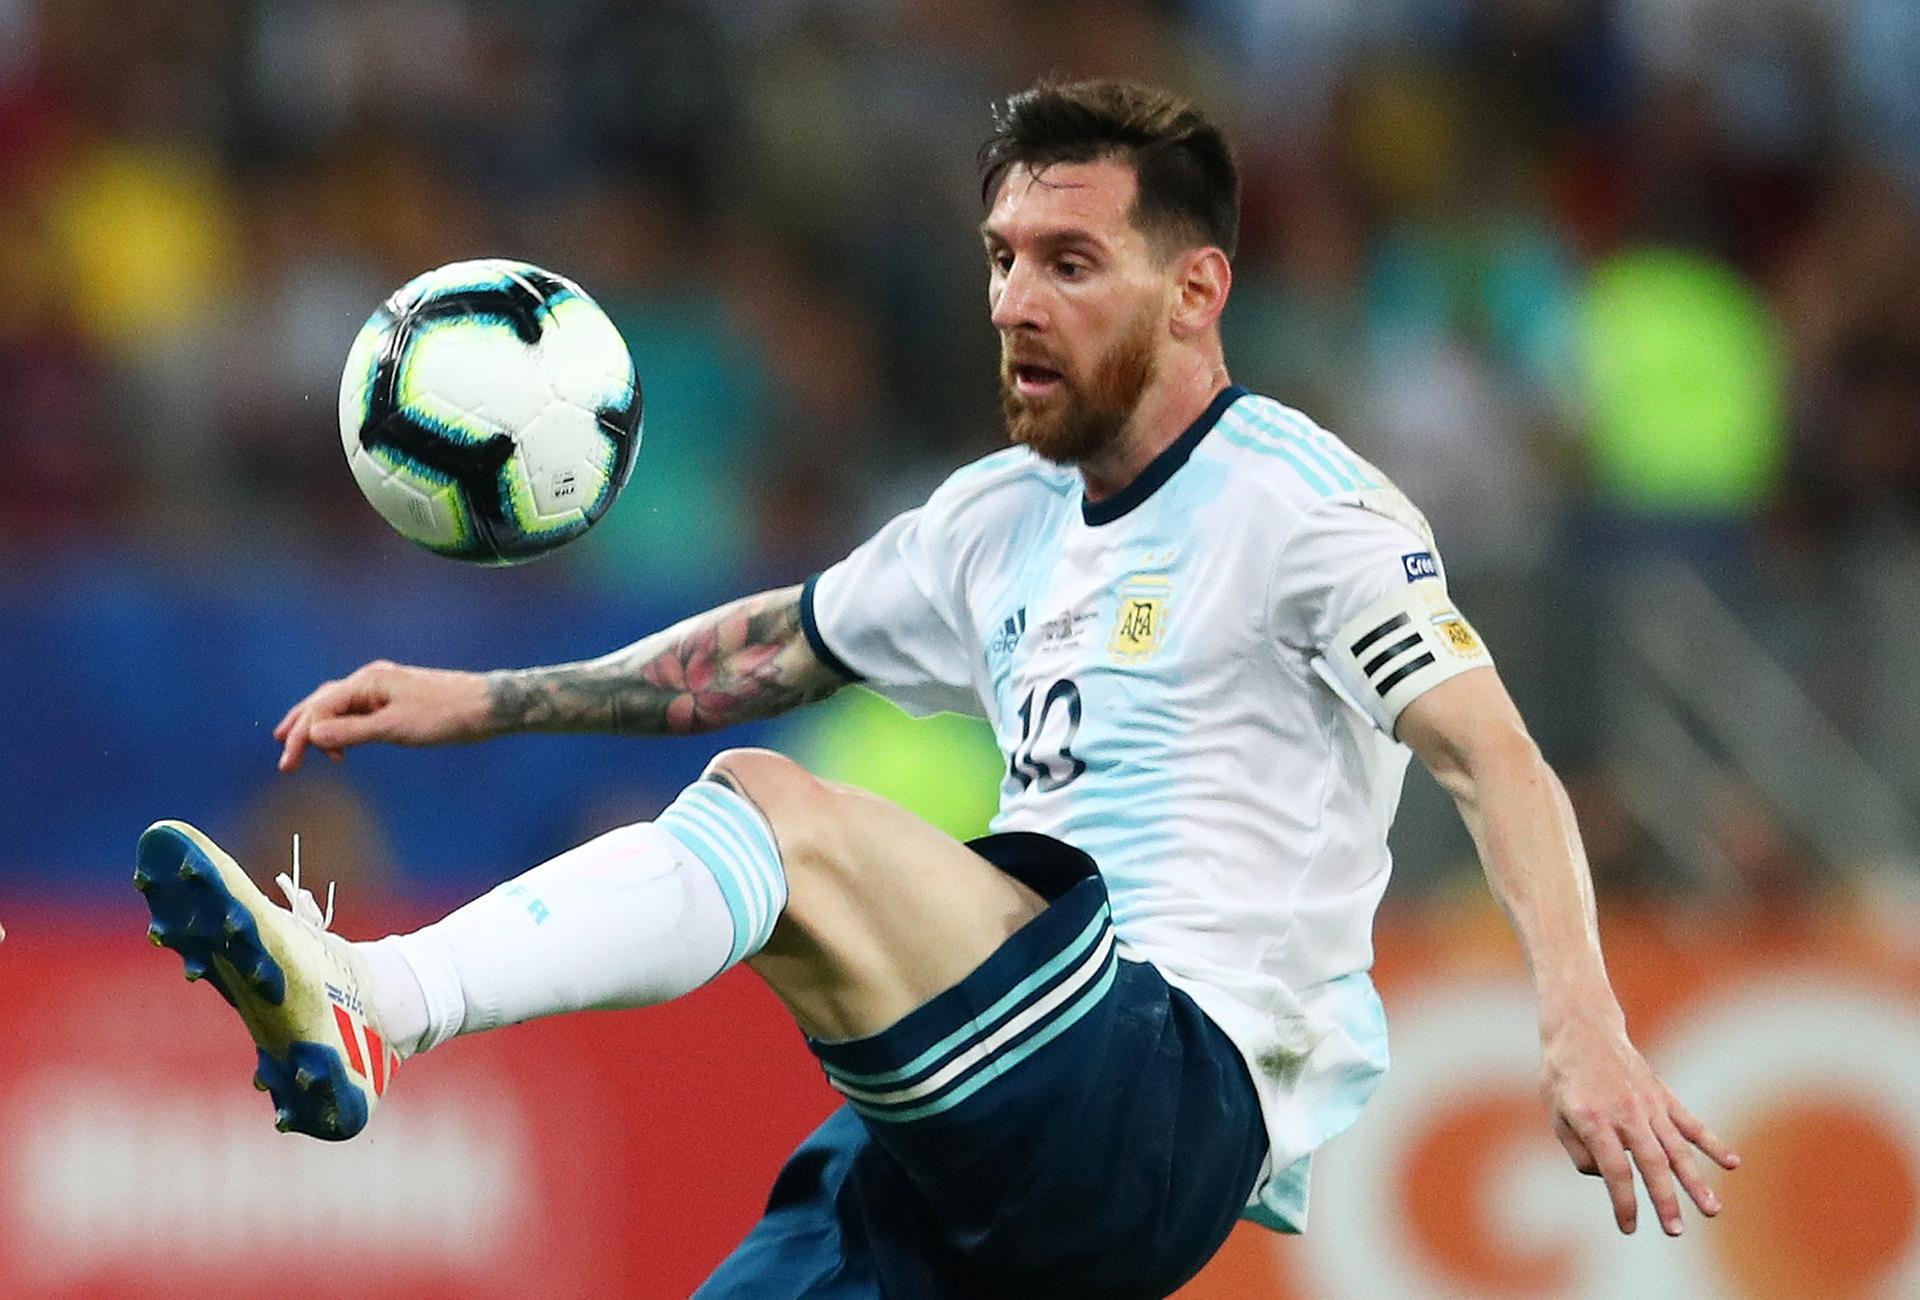 Lionel Messi has mastered a football like no one else. But is that